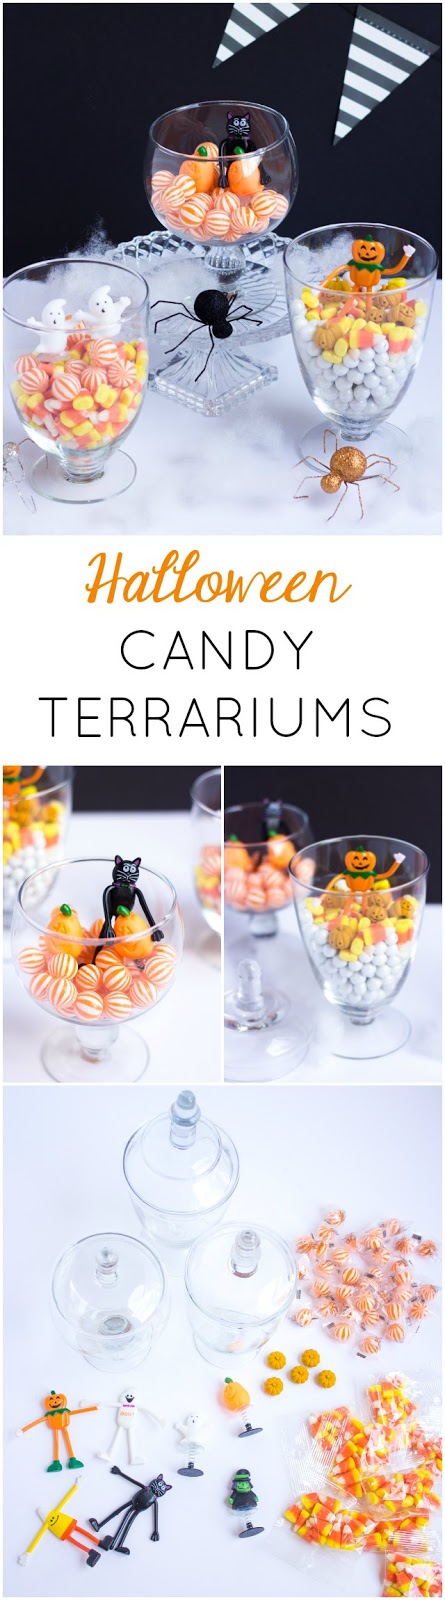 Fill glass jars with candy and figurines to make these cute DIY Halloween Terrariums!